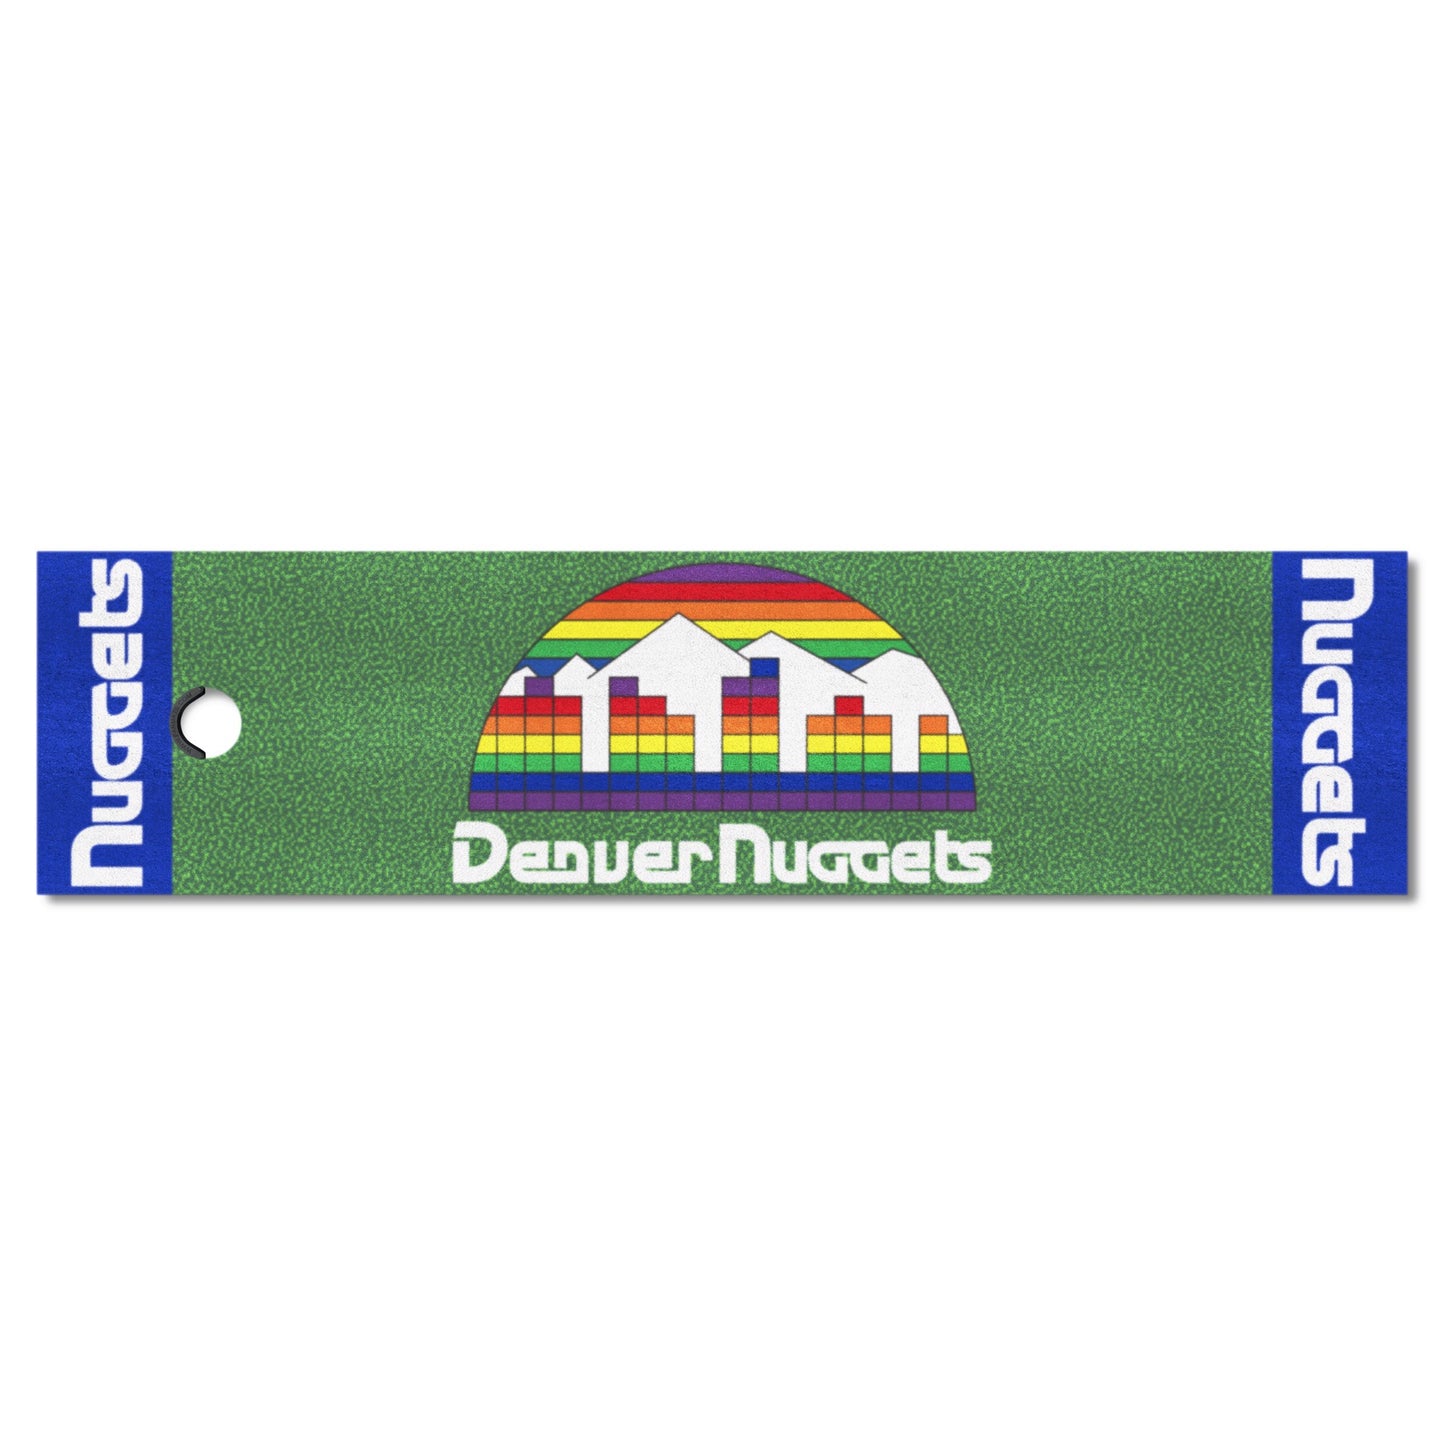 Denver Nuggets Retro Green Putting Mat by Fanmats